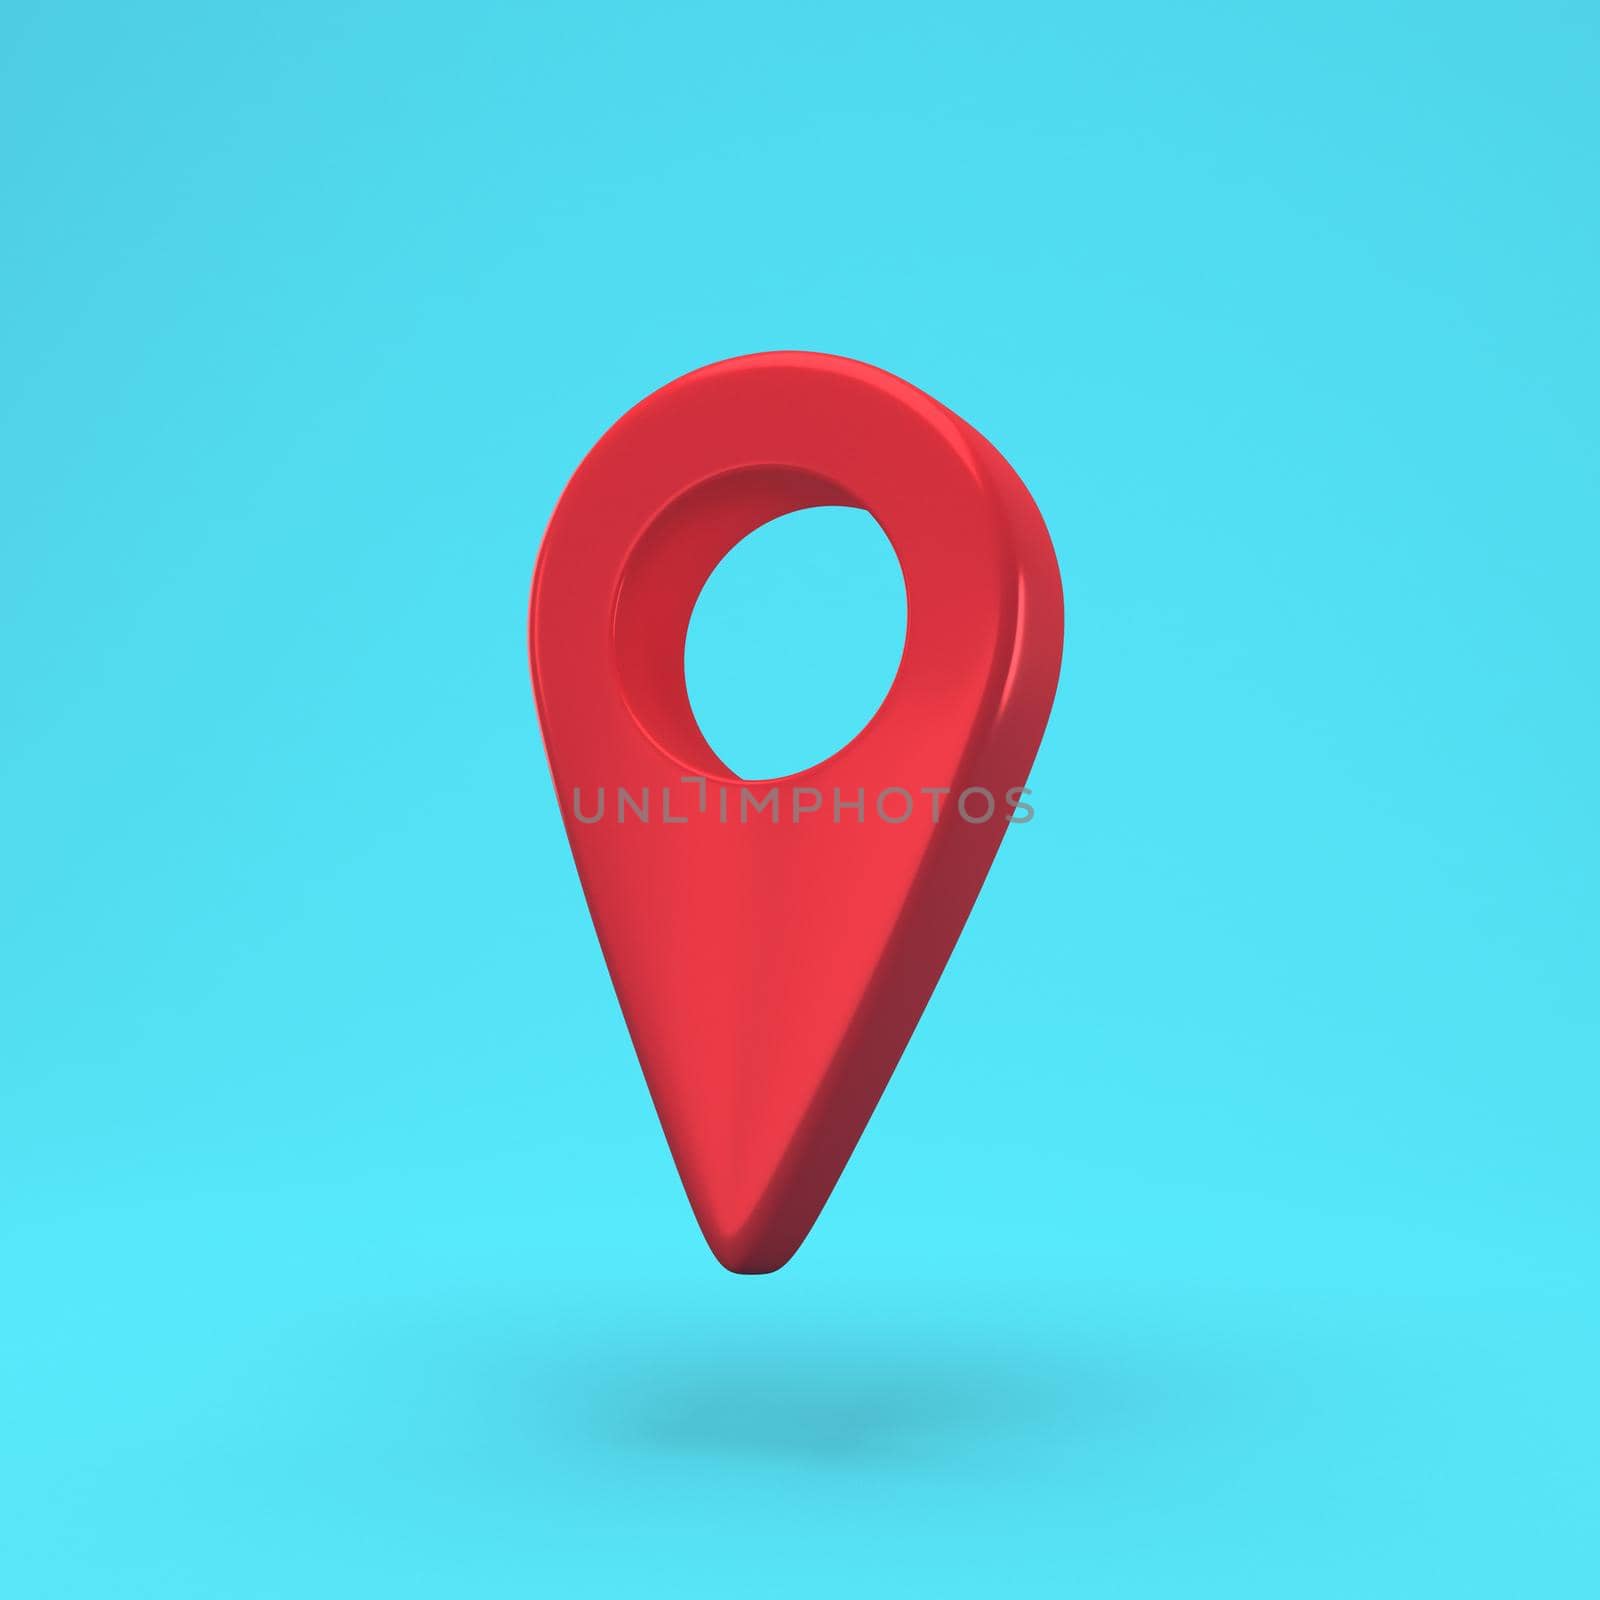 Red Map pin icon isolated background. Navigation, pointer, location, map, gps, direction, place, compass, contact, search concept. Minimalism concept. 3d illustration 3D render